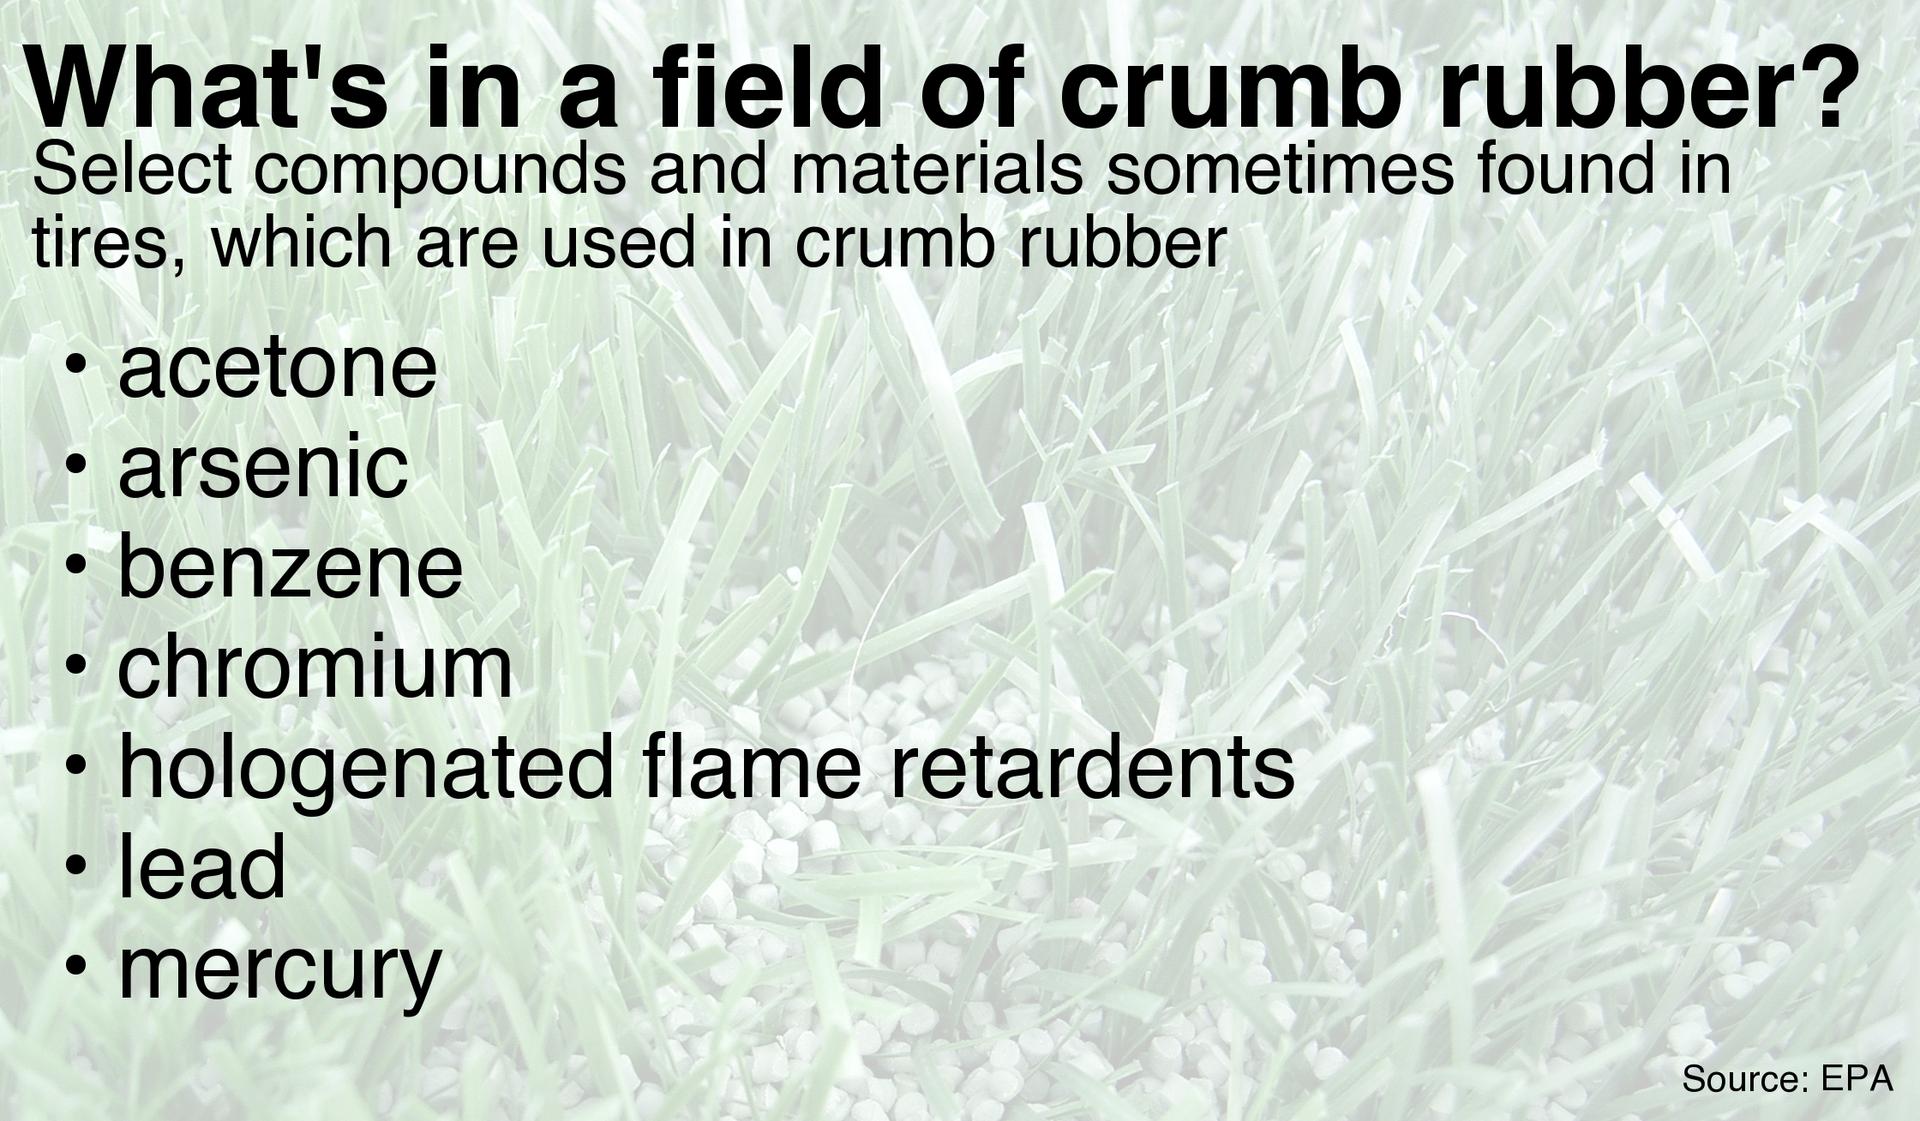 Examples of the hazardous material contained in some crumb rubber.